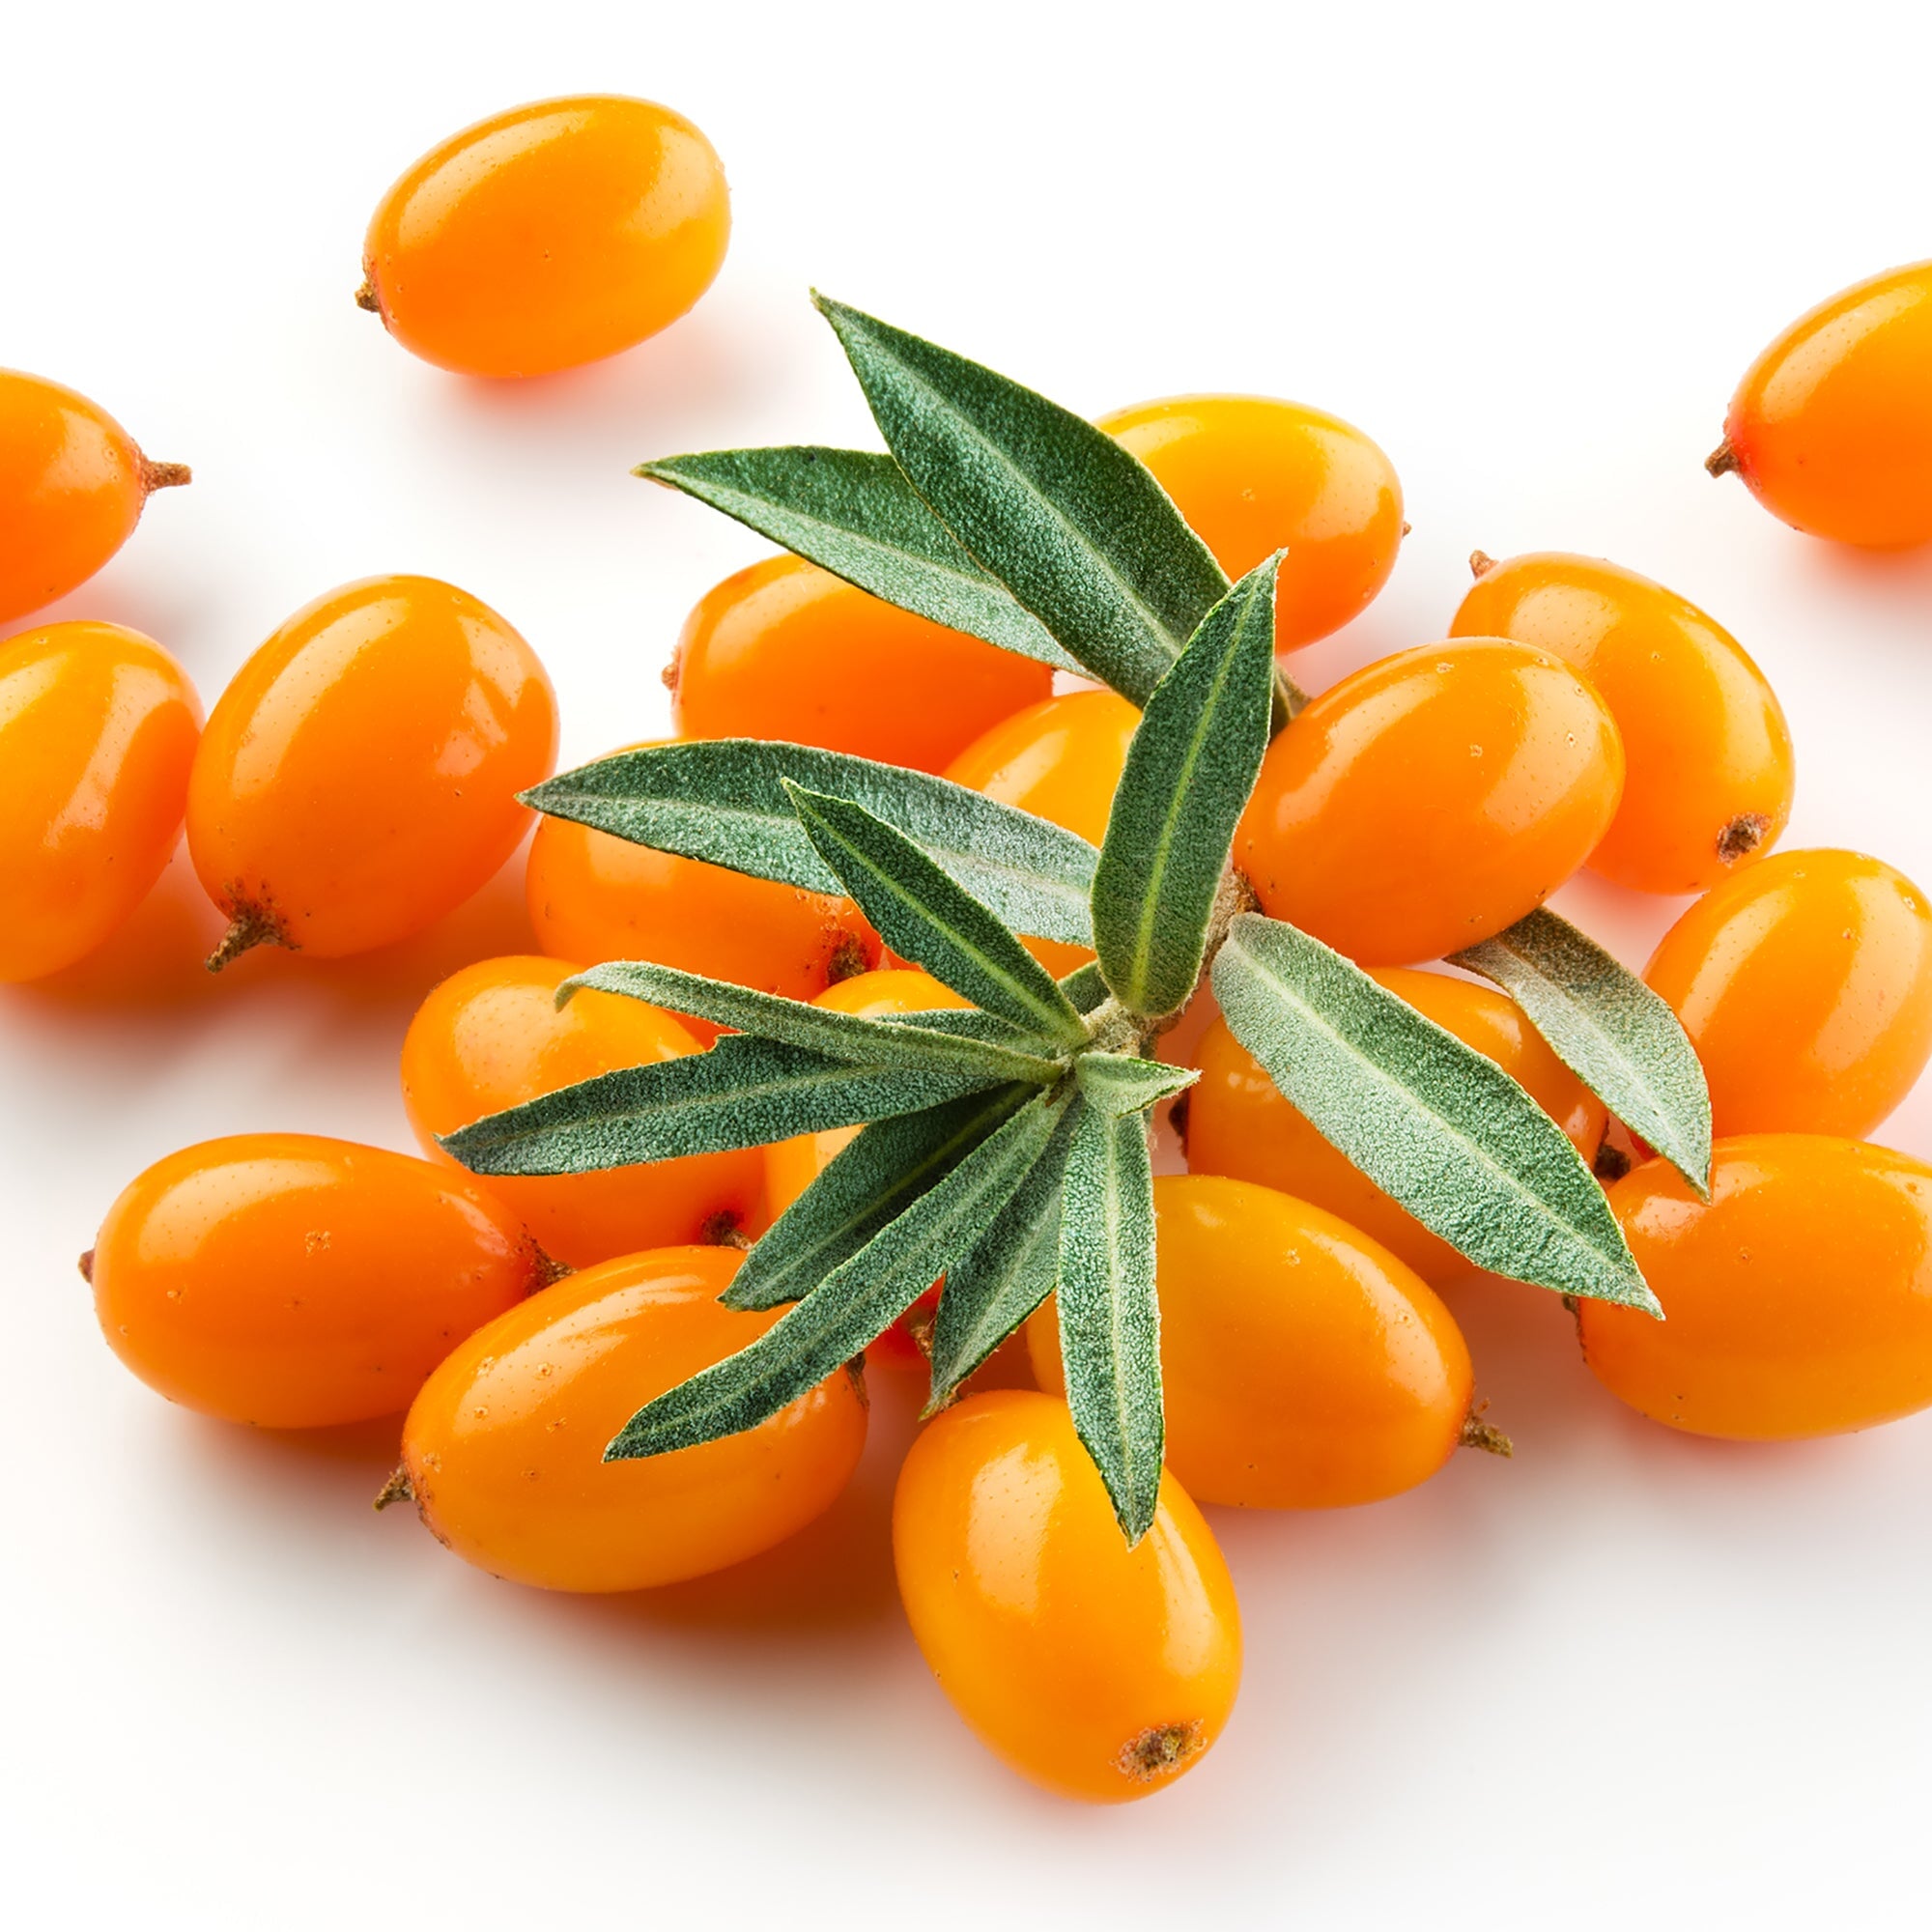 sea buckthorn berries on a white background